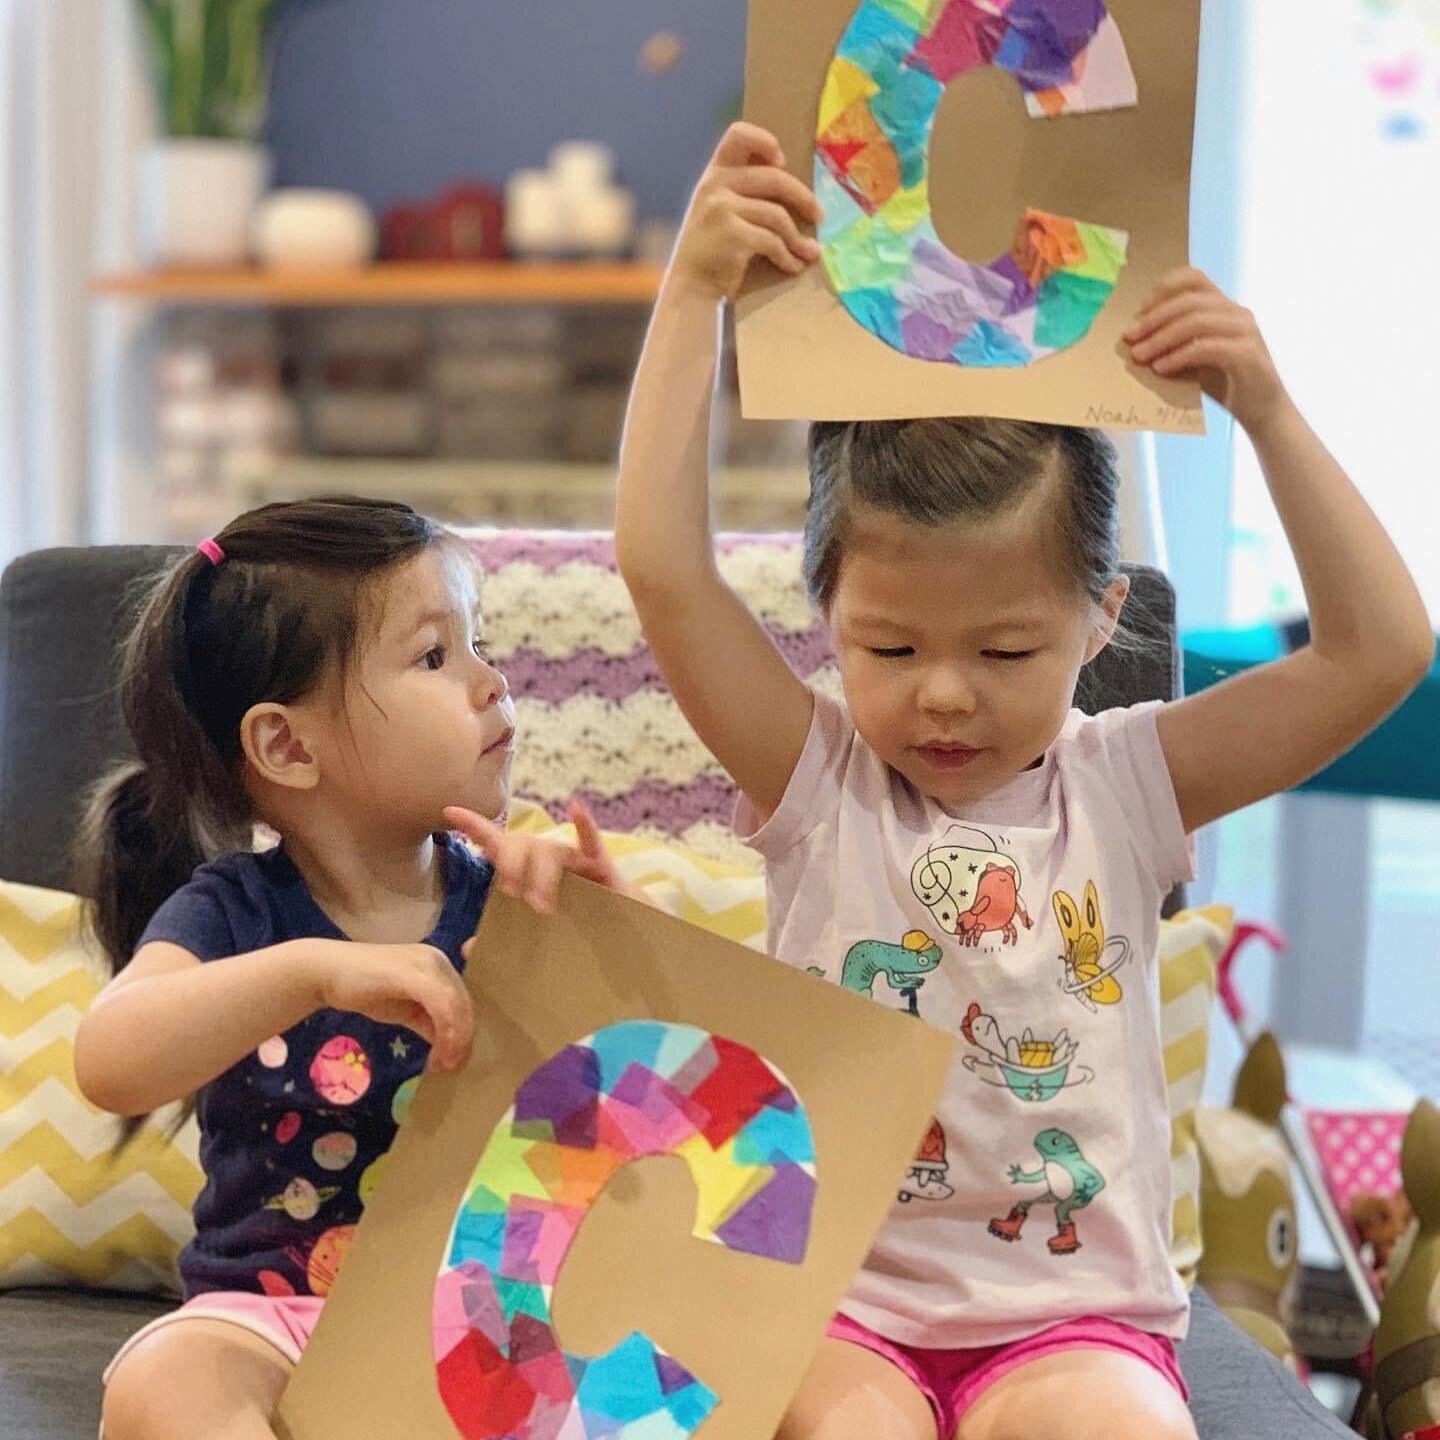 Look at these cute sisters working through their boxes! C is for cuties!!!!
.
.

#bayareakids #bayareafamilies #schoolinabox #toddlers #toddlersofinstagram #toddleractivities #toddlermom #ilovealameda #510families #toddlerhomeschool #homeschool #kids